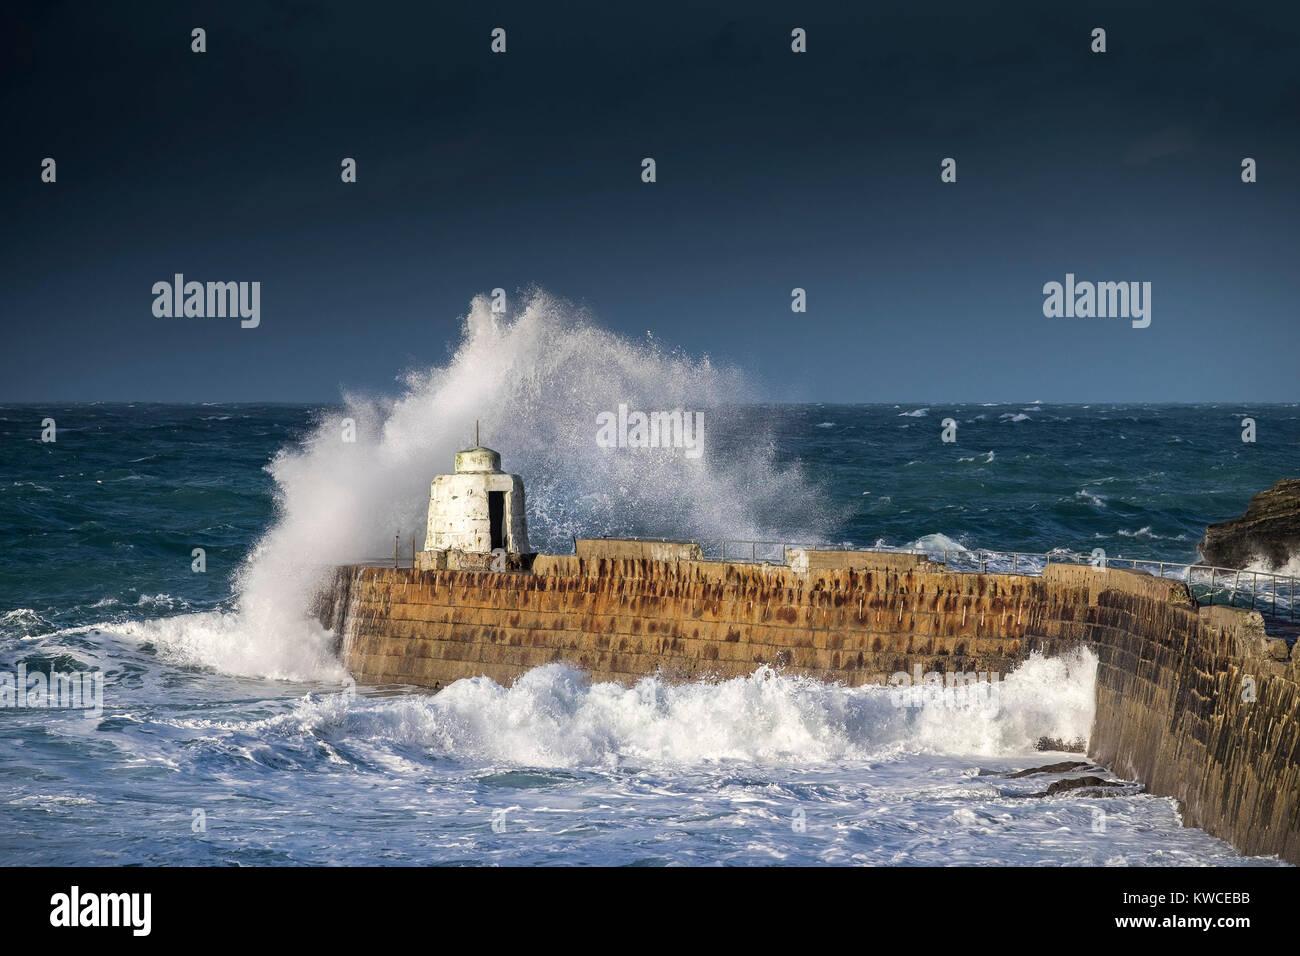 UK weather - Gale force winds driving huge waves over the pier at Portreath Harbour in Cornwall. Stock Photo